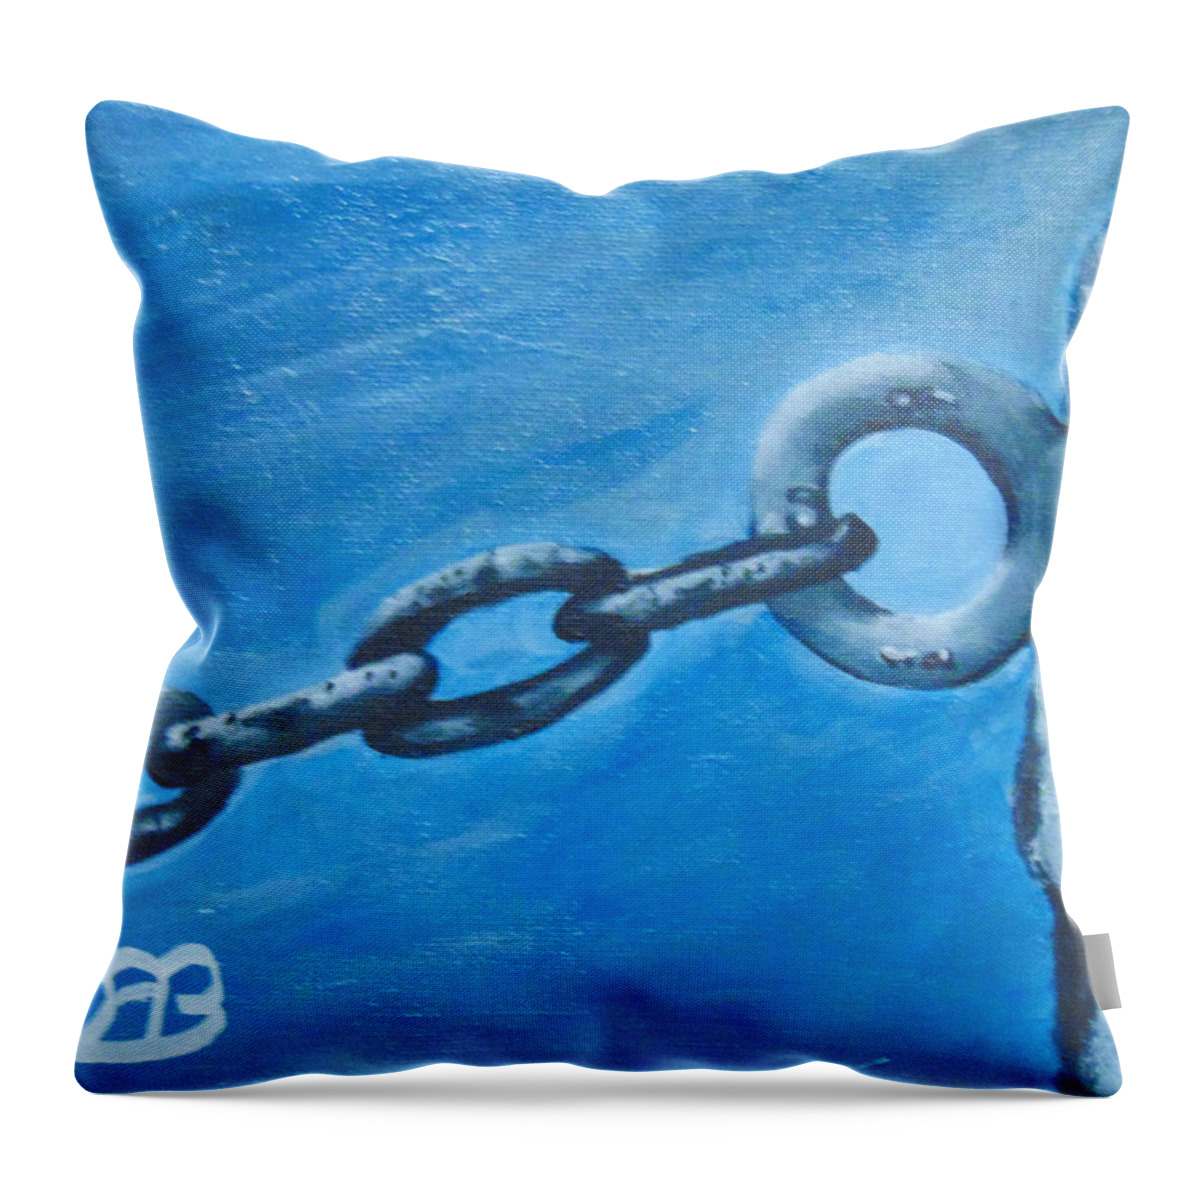 Chain Link Throw Pillow featuring the painting Chained by David Bigelow